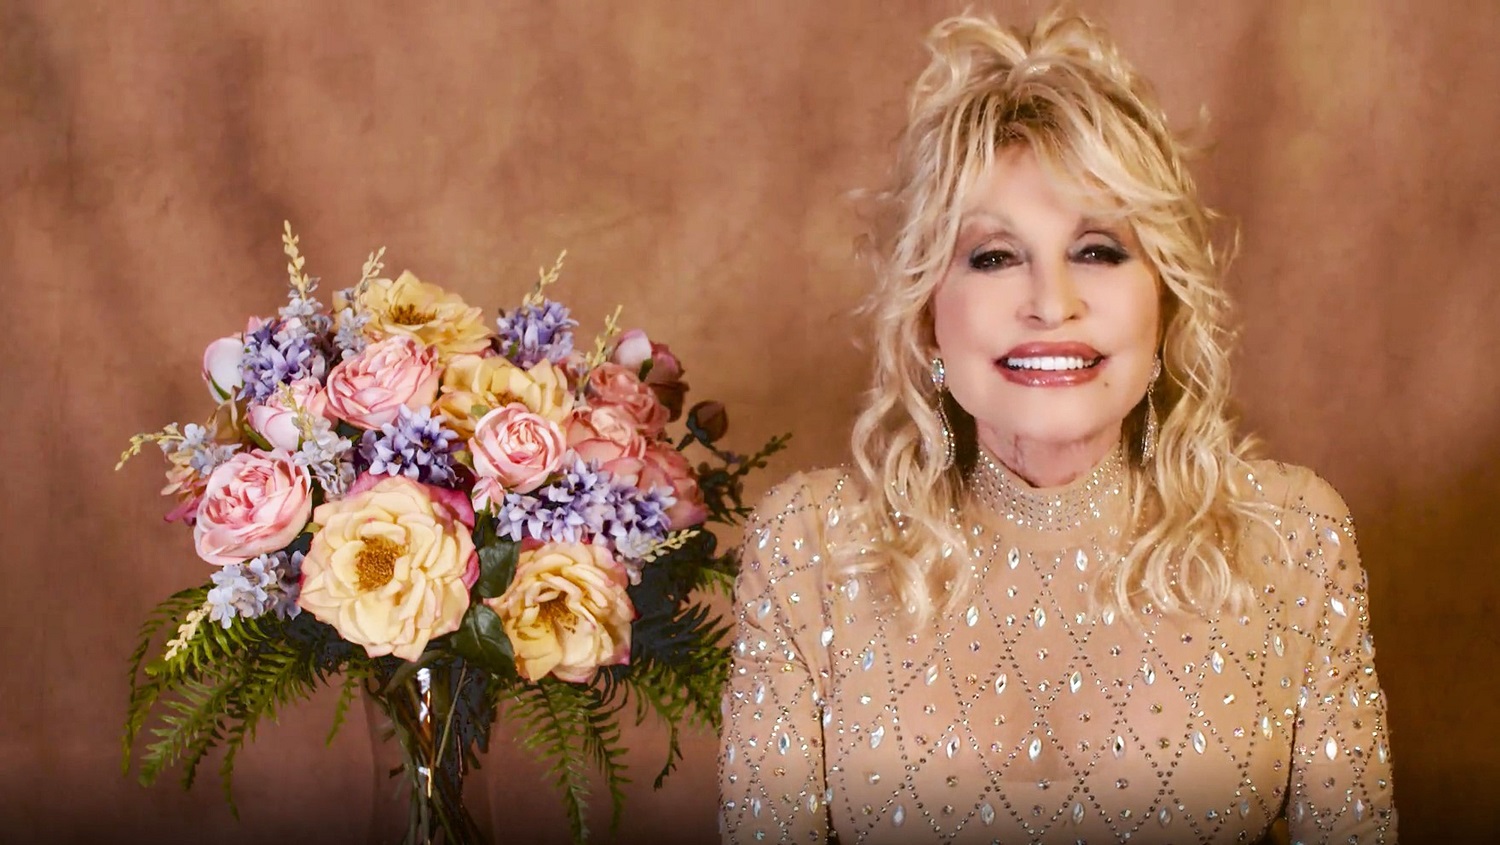 Dolly Parton speaks at the 56th Academy of Country Music Awards on April 18, 2021 in Nashville, Tennessee. 